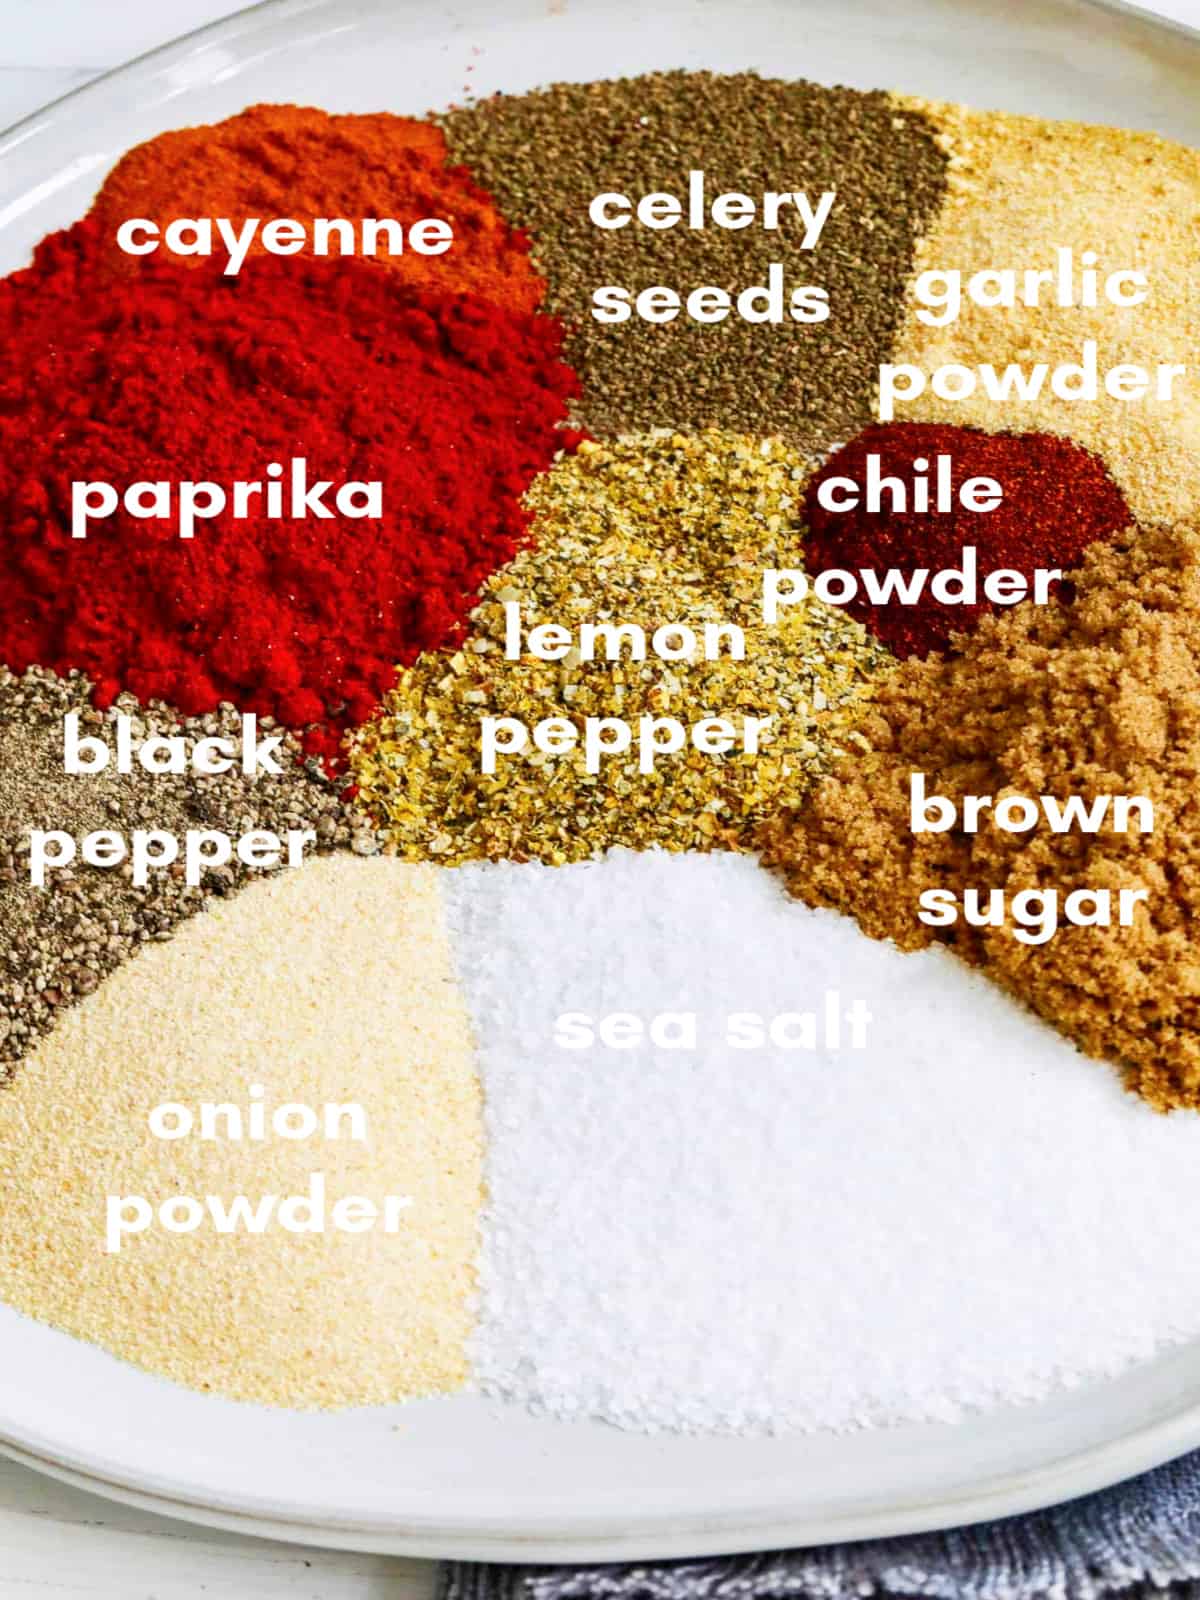 https://www.delicioustable.com/wp-content/uploads/2022/05/BBQ-Rub-Ingredients.jpg